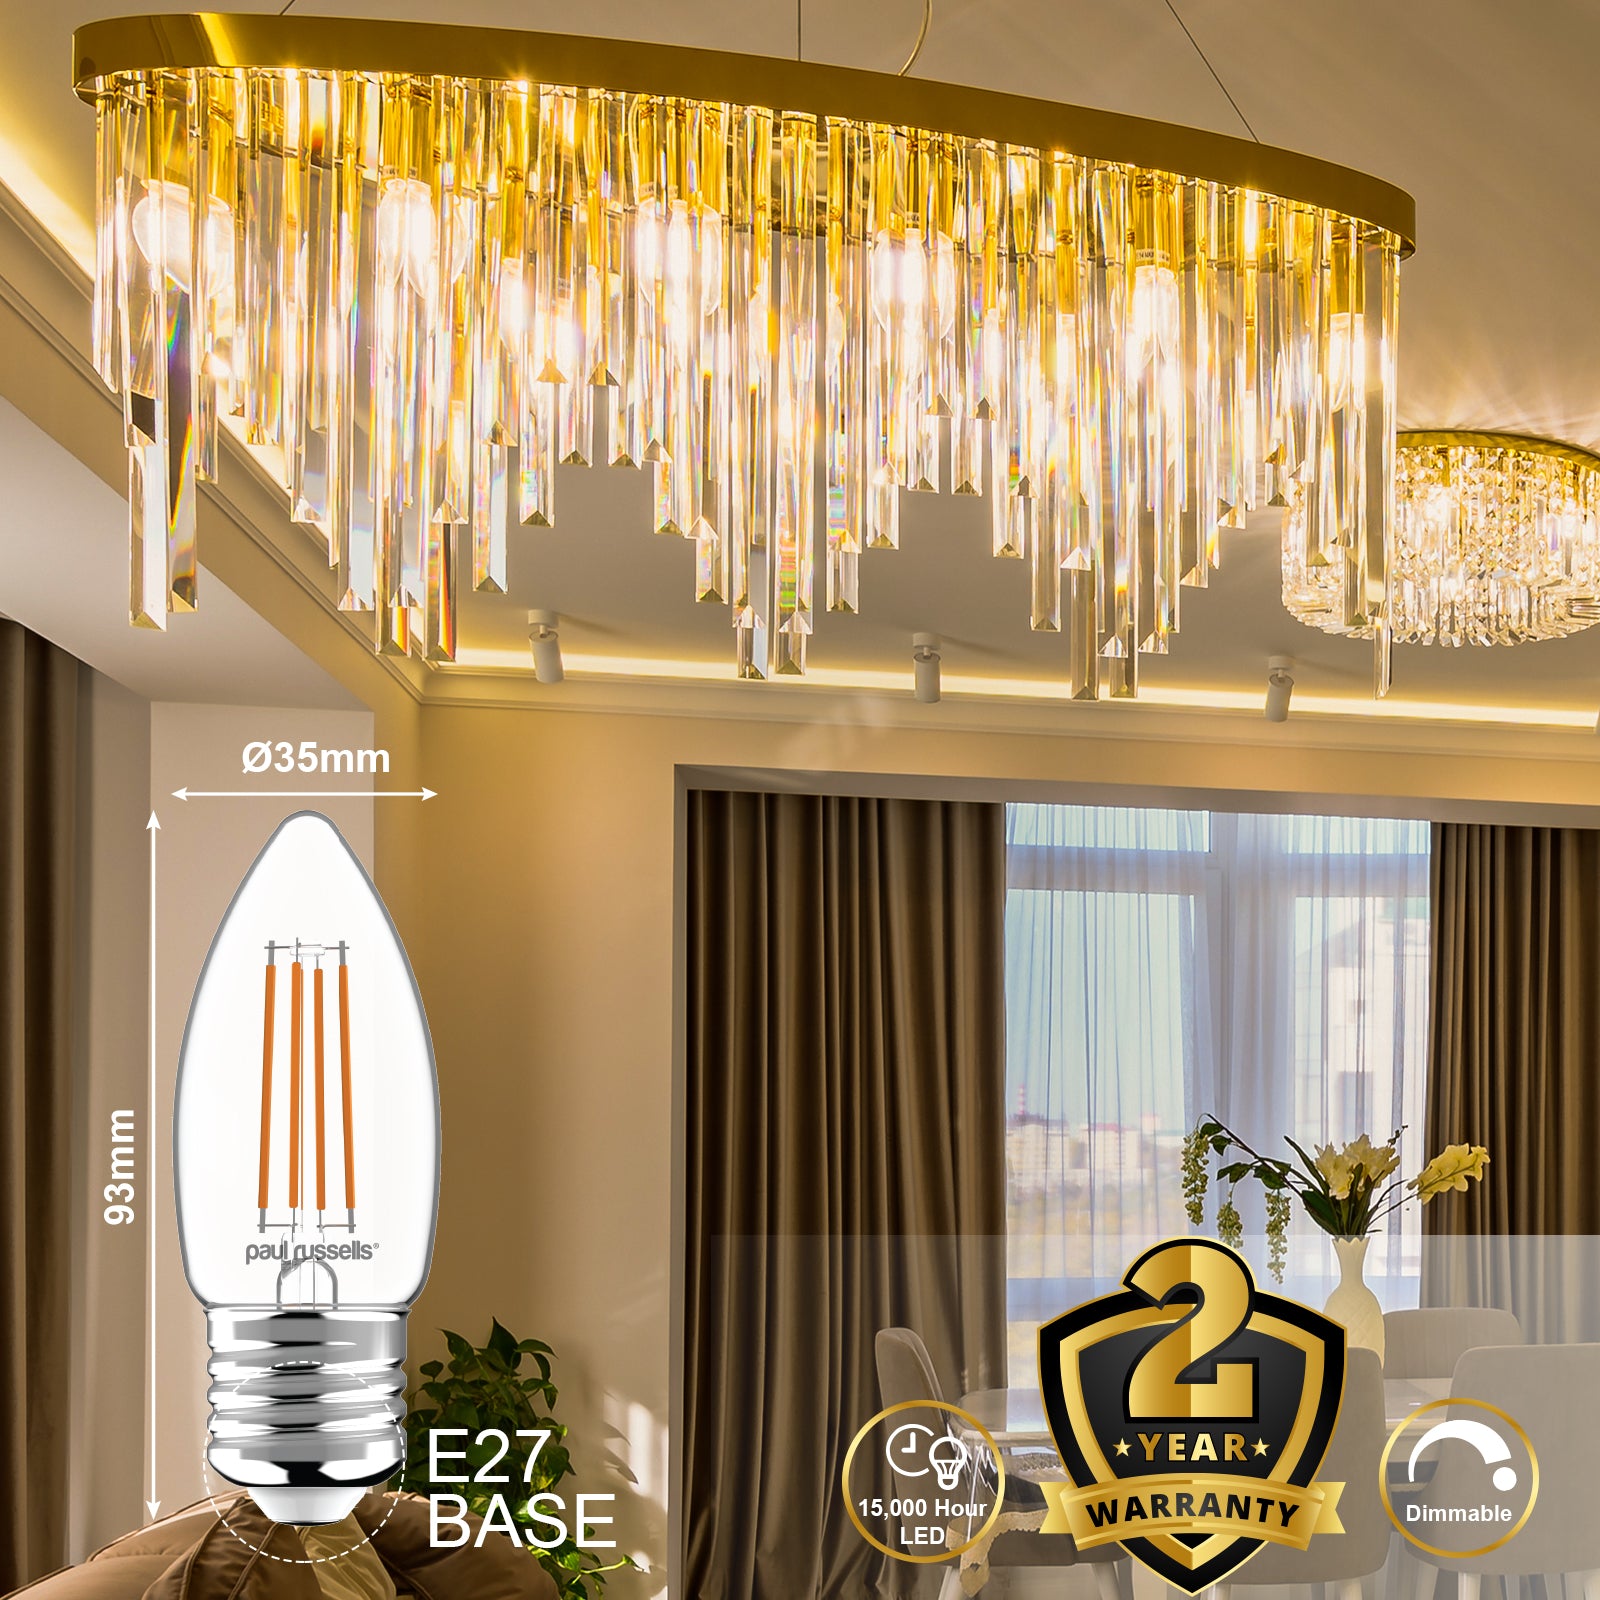 LED Dimmable Filament Candle 4.5W (40w), ES/E27, 423 Lumens, Warm White(2700K), 240V